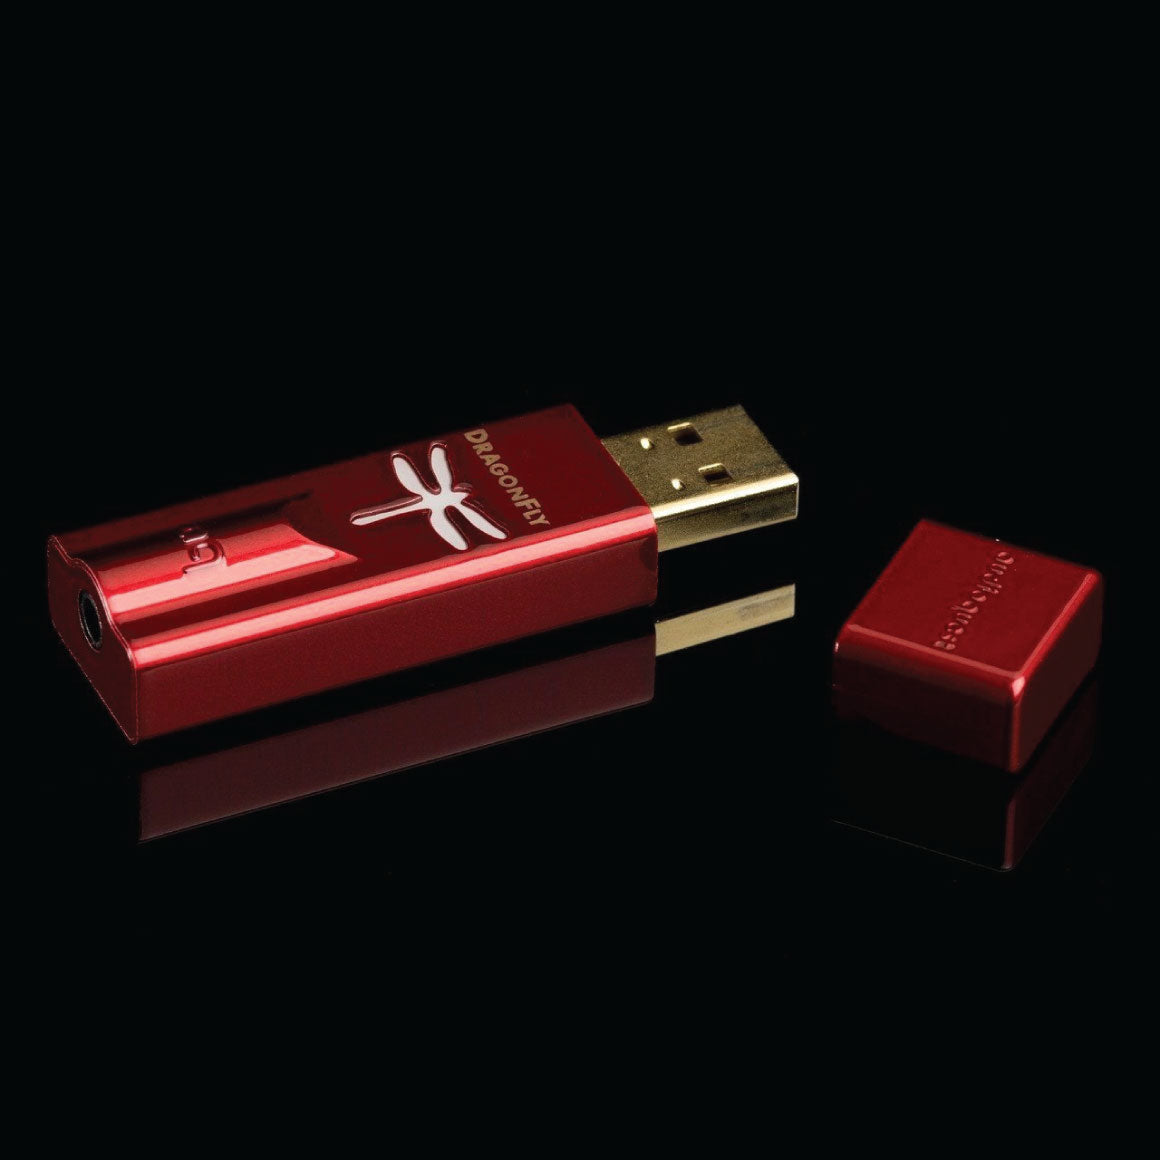 AudioQuest DragonFly Red USB DAC/Headphone Amplifier